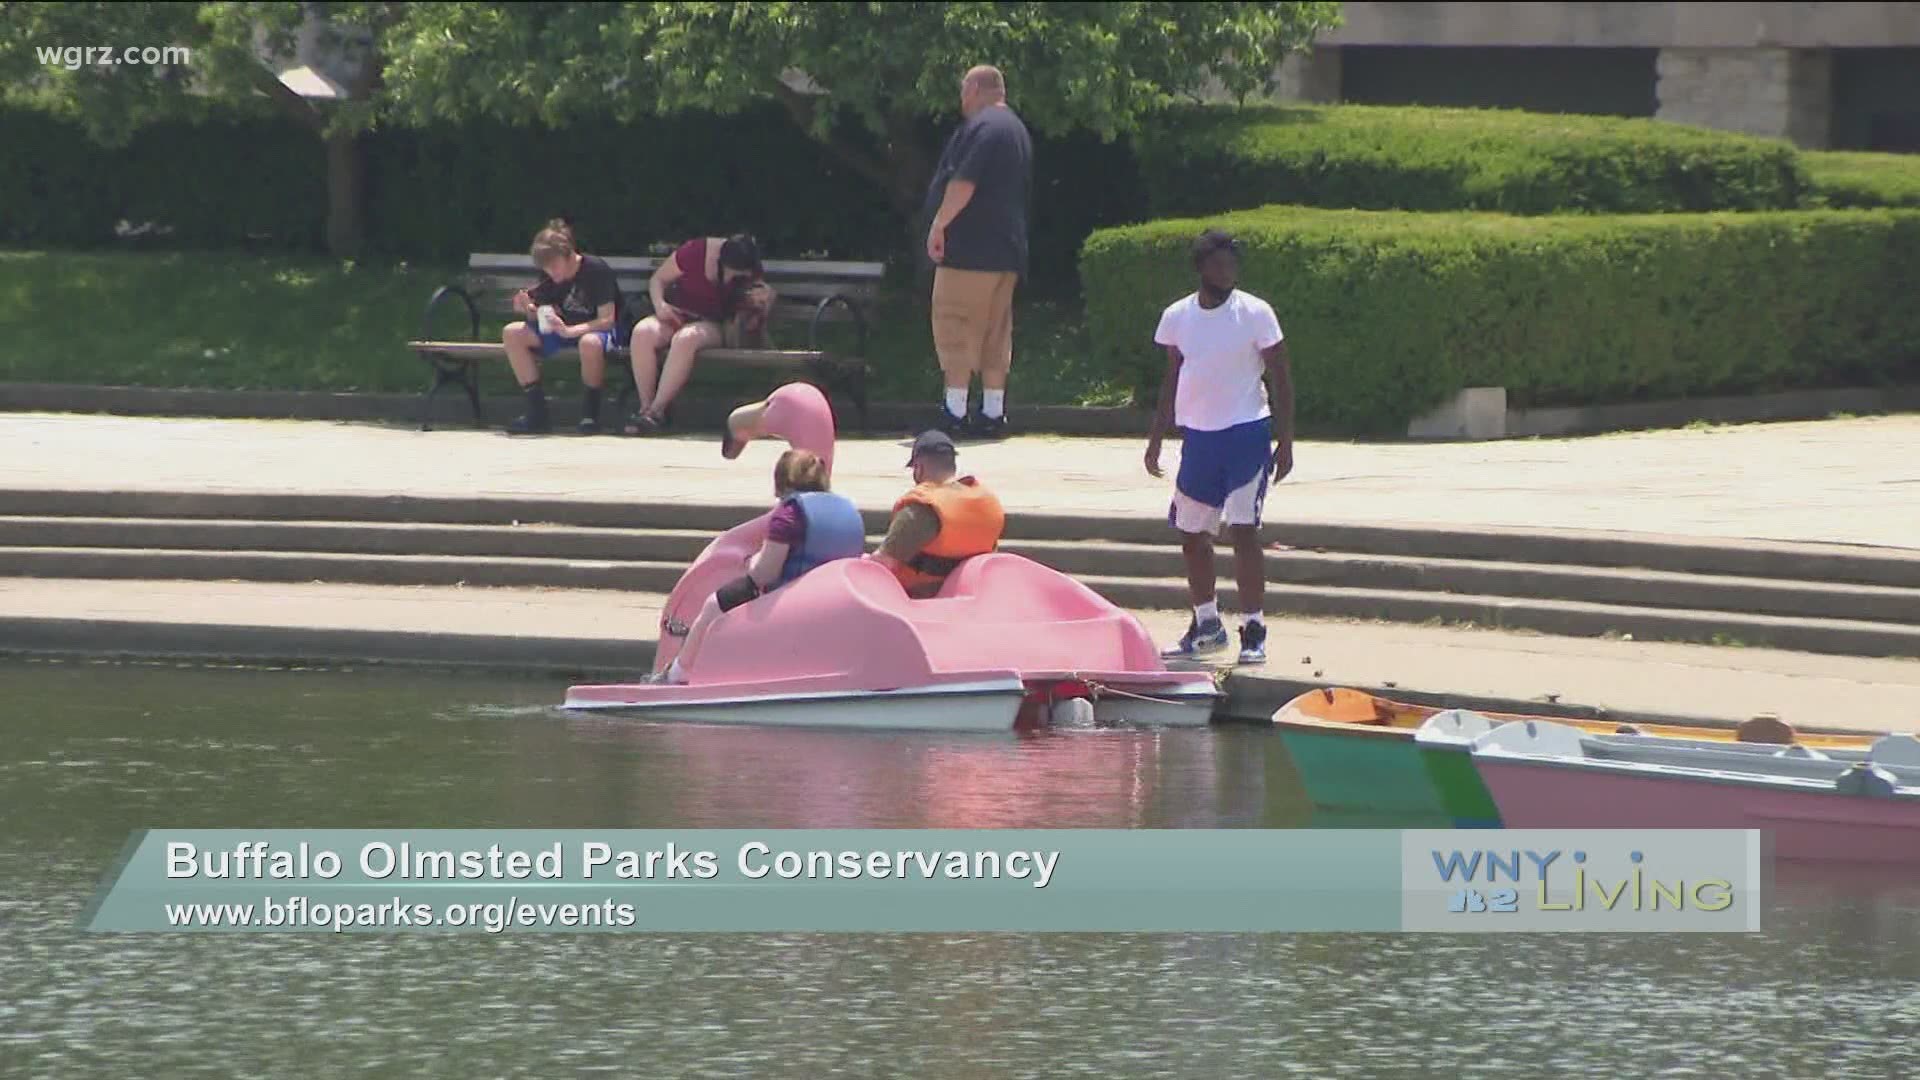 WNY Living - June 5 - Buffalo Olmsted Parks Conservancy (THIS VIDEO IS SPONSORED BY BUFFALO OLMSTED PARKS CONSERVANCY)